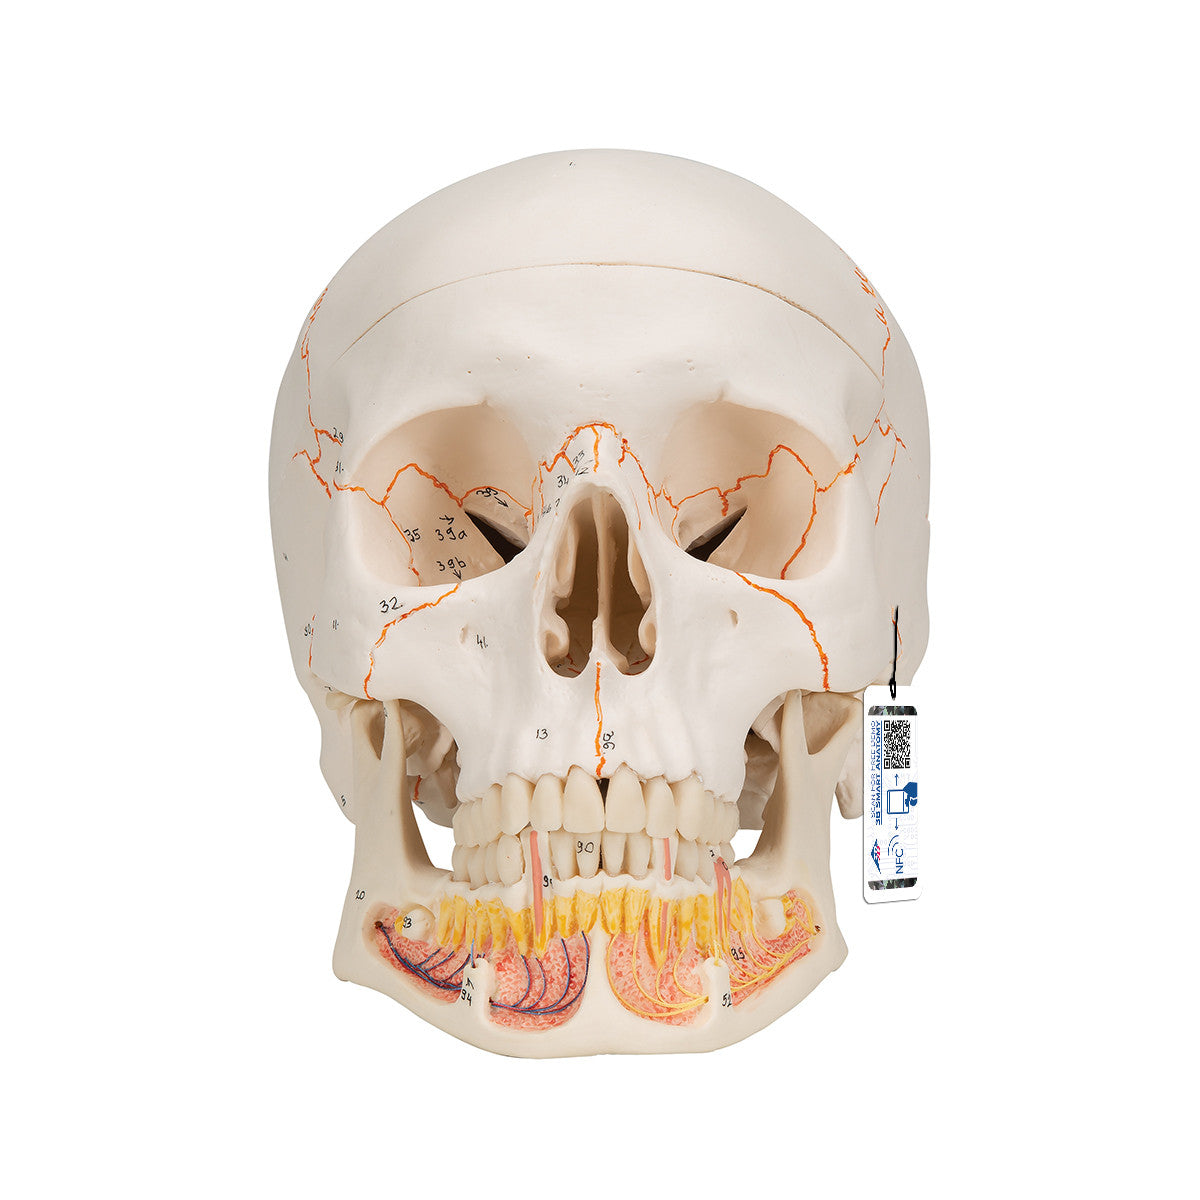 Classic Human Skull Model with Opened Lower Jaw, 3-parts | 3B Scientific A22